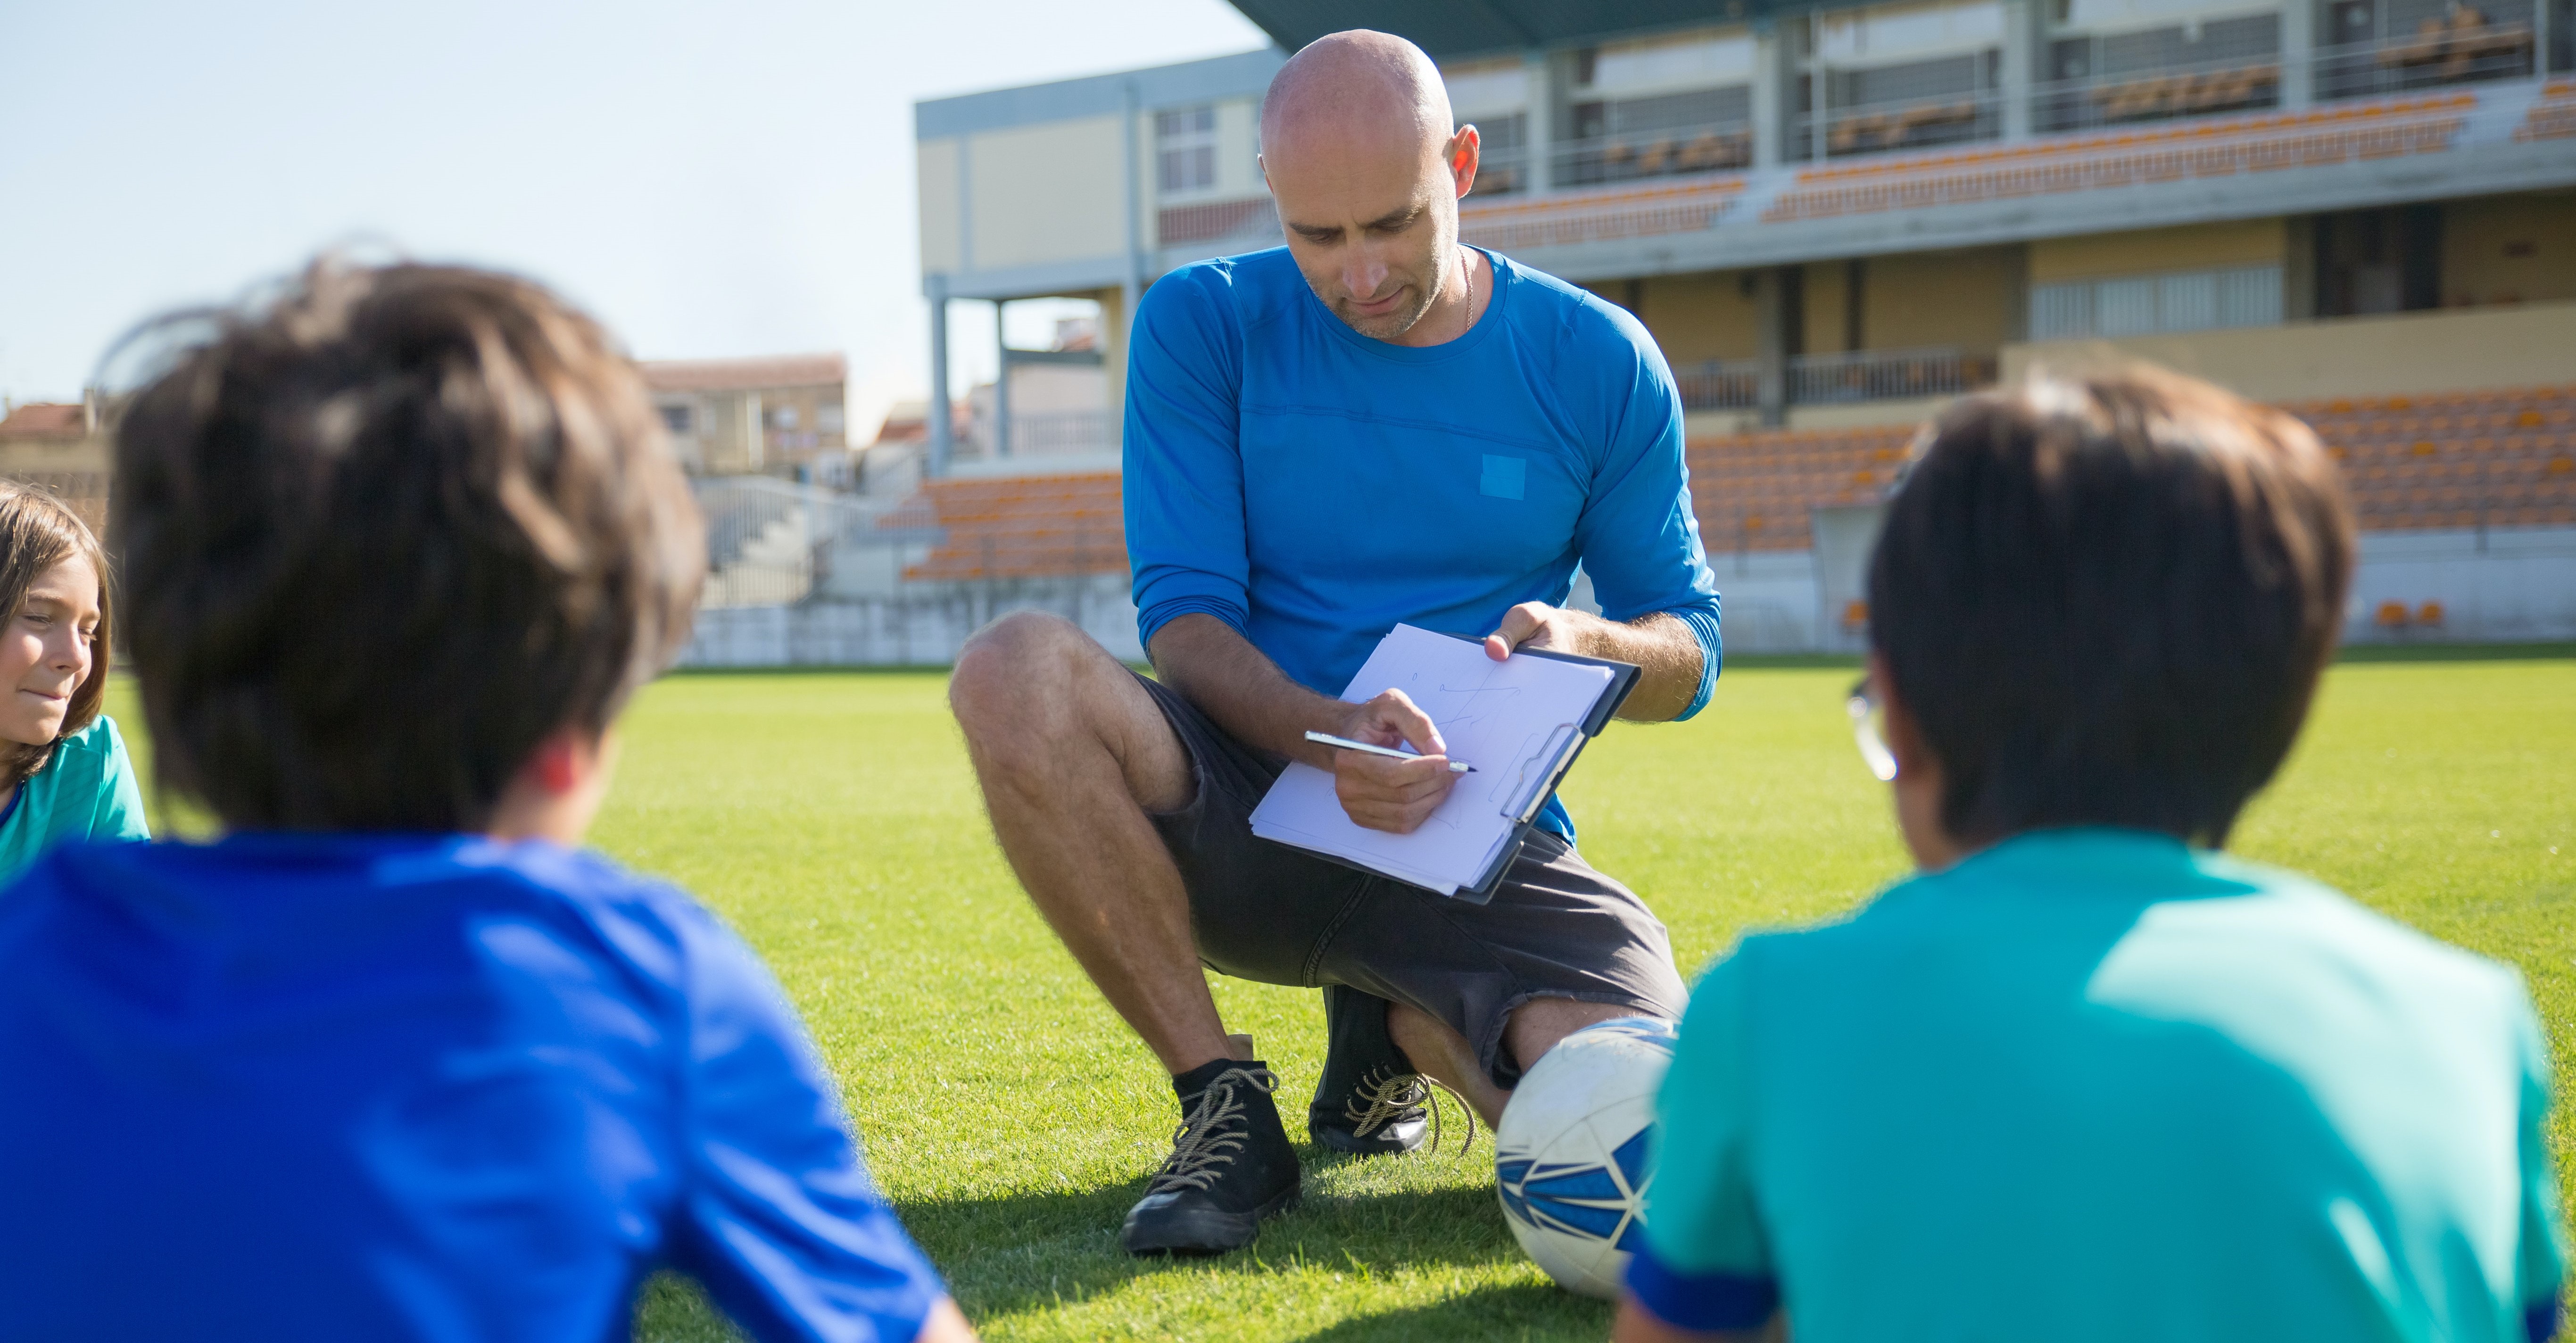 Soccer coach on the field talking to young soccer players